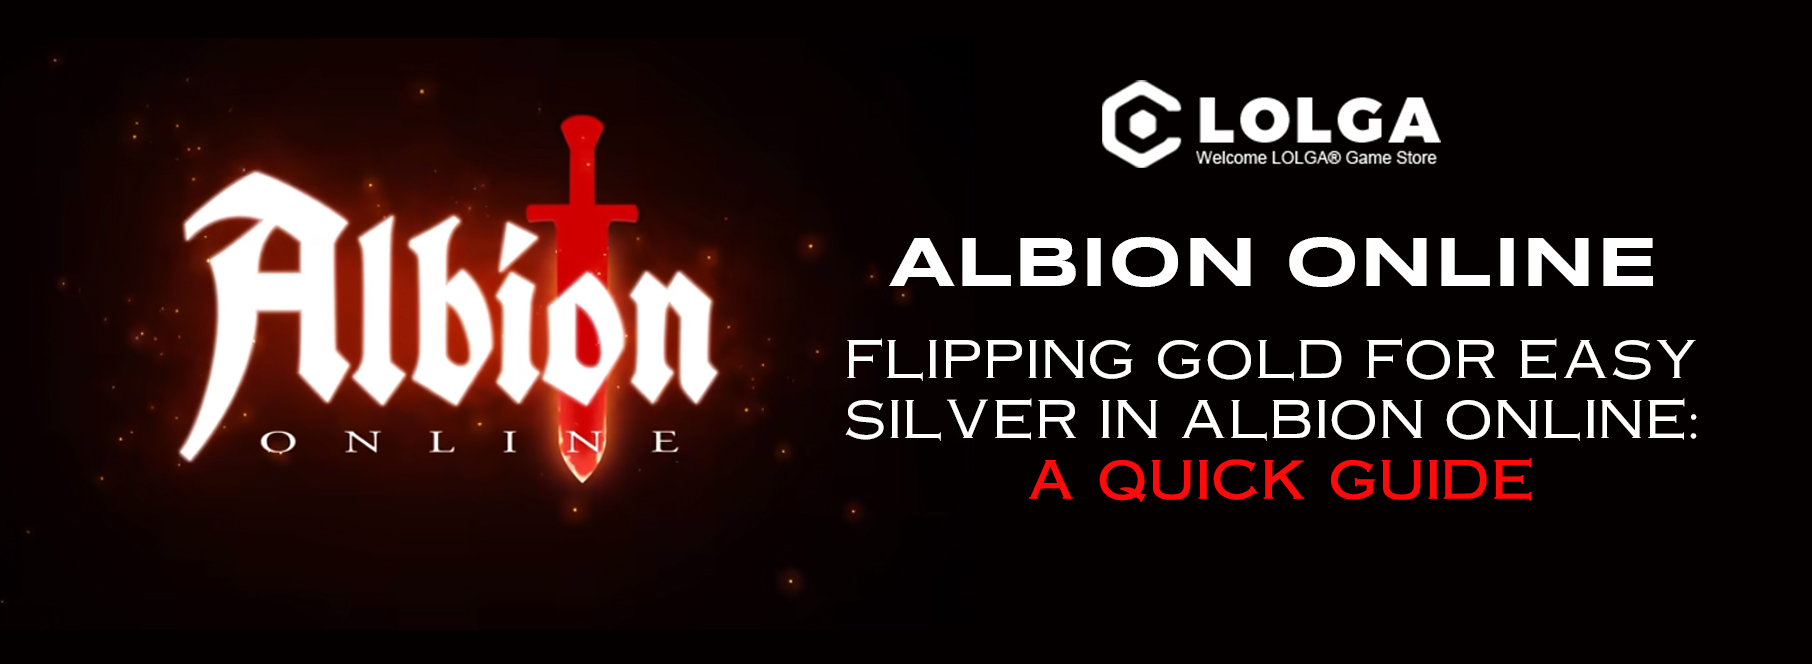 Flipping Gold for Easy Silver in Albion Online: A Quick Guide